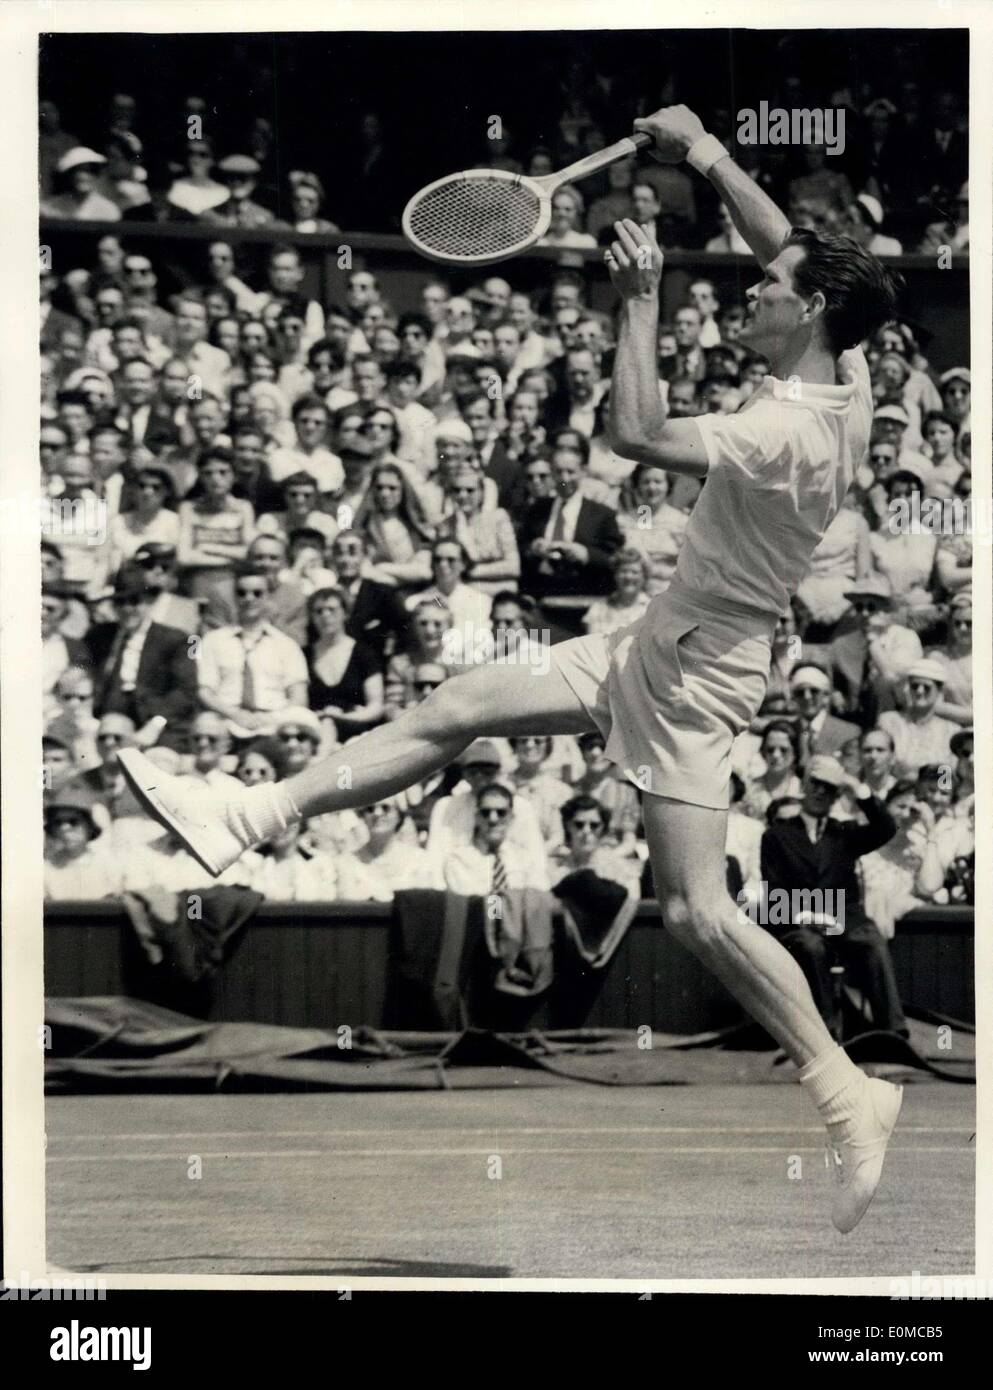 Jun. 23, 1954 - 3rd day of Wimbledon Tennis Championships; Budge Patty (USA) in play against H.W. Stewart (USA) in the men's singles on the center court this afternoon. Stock Photo